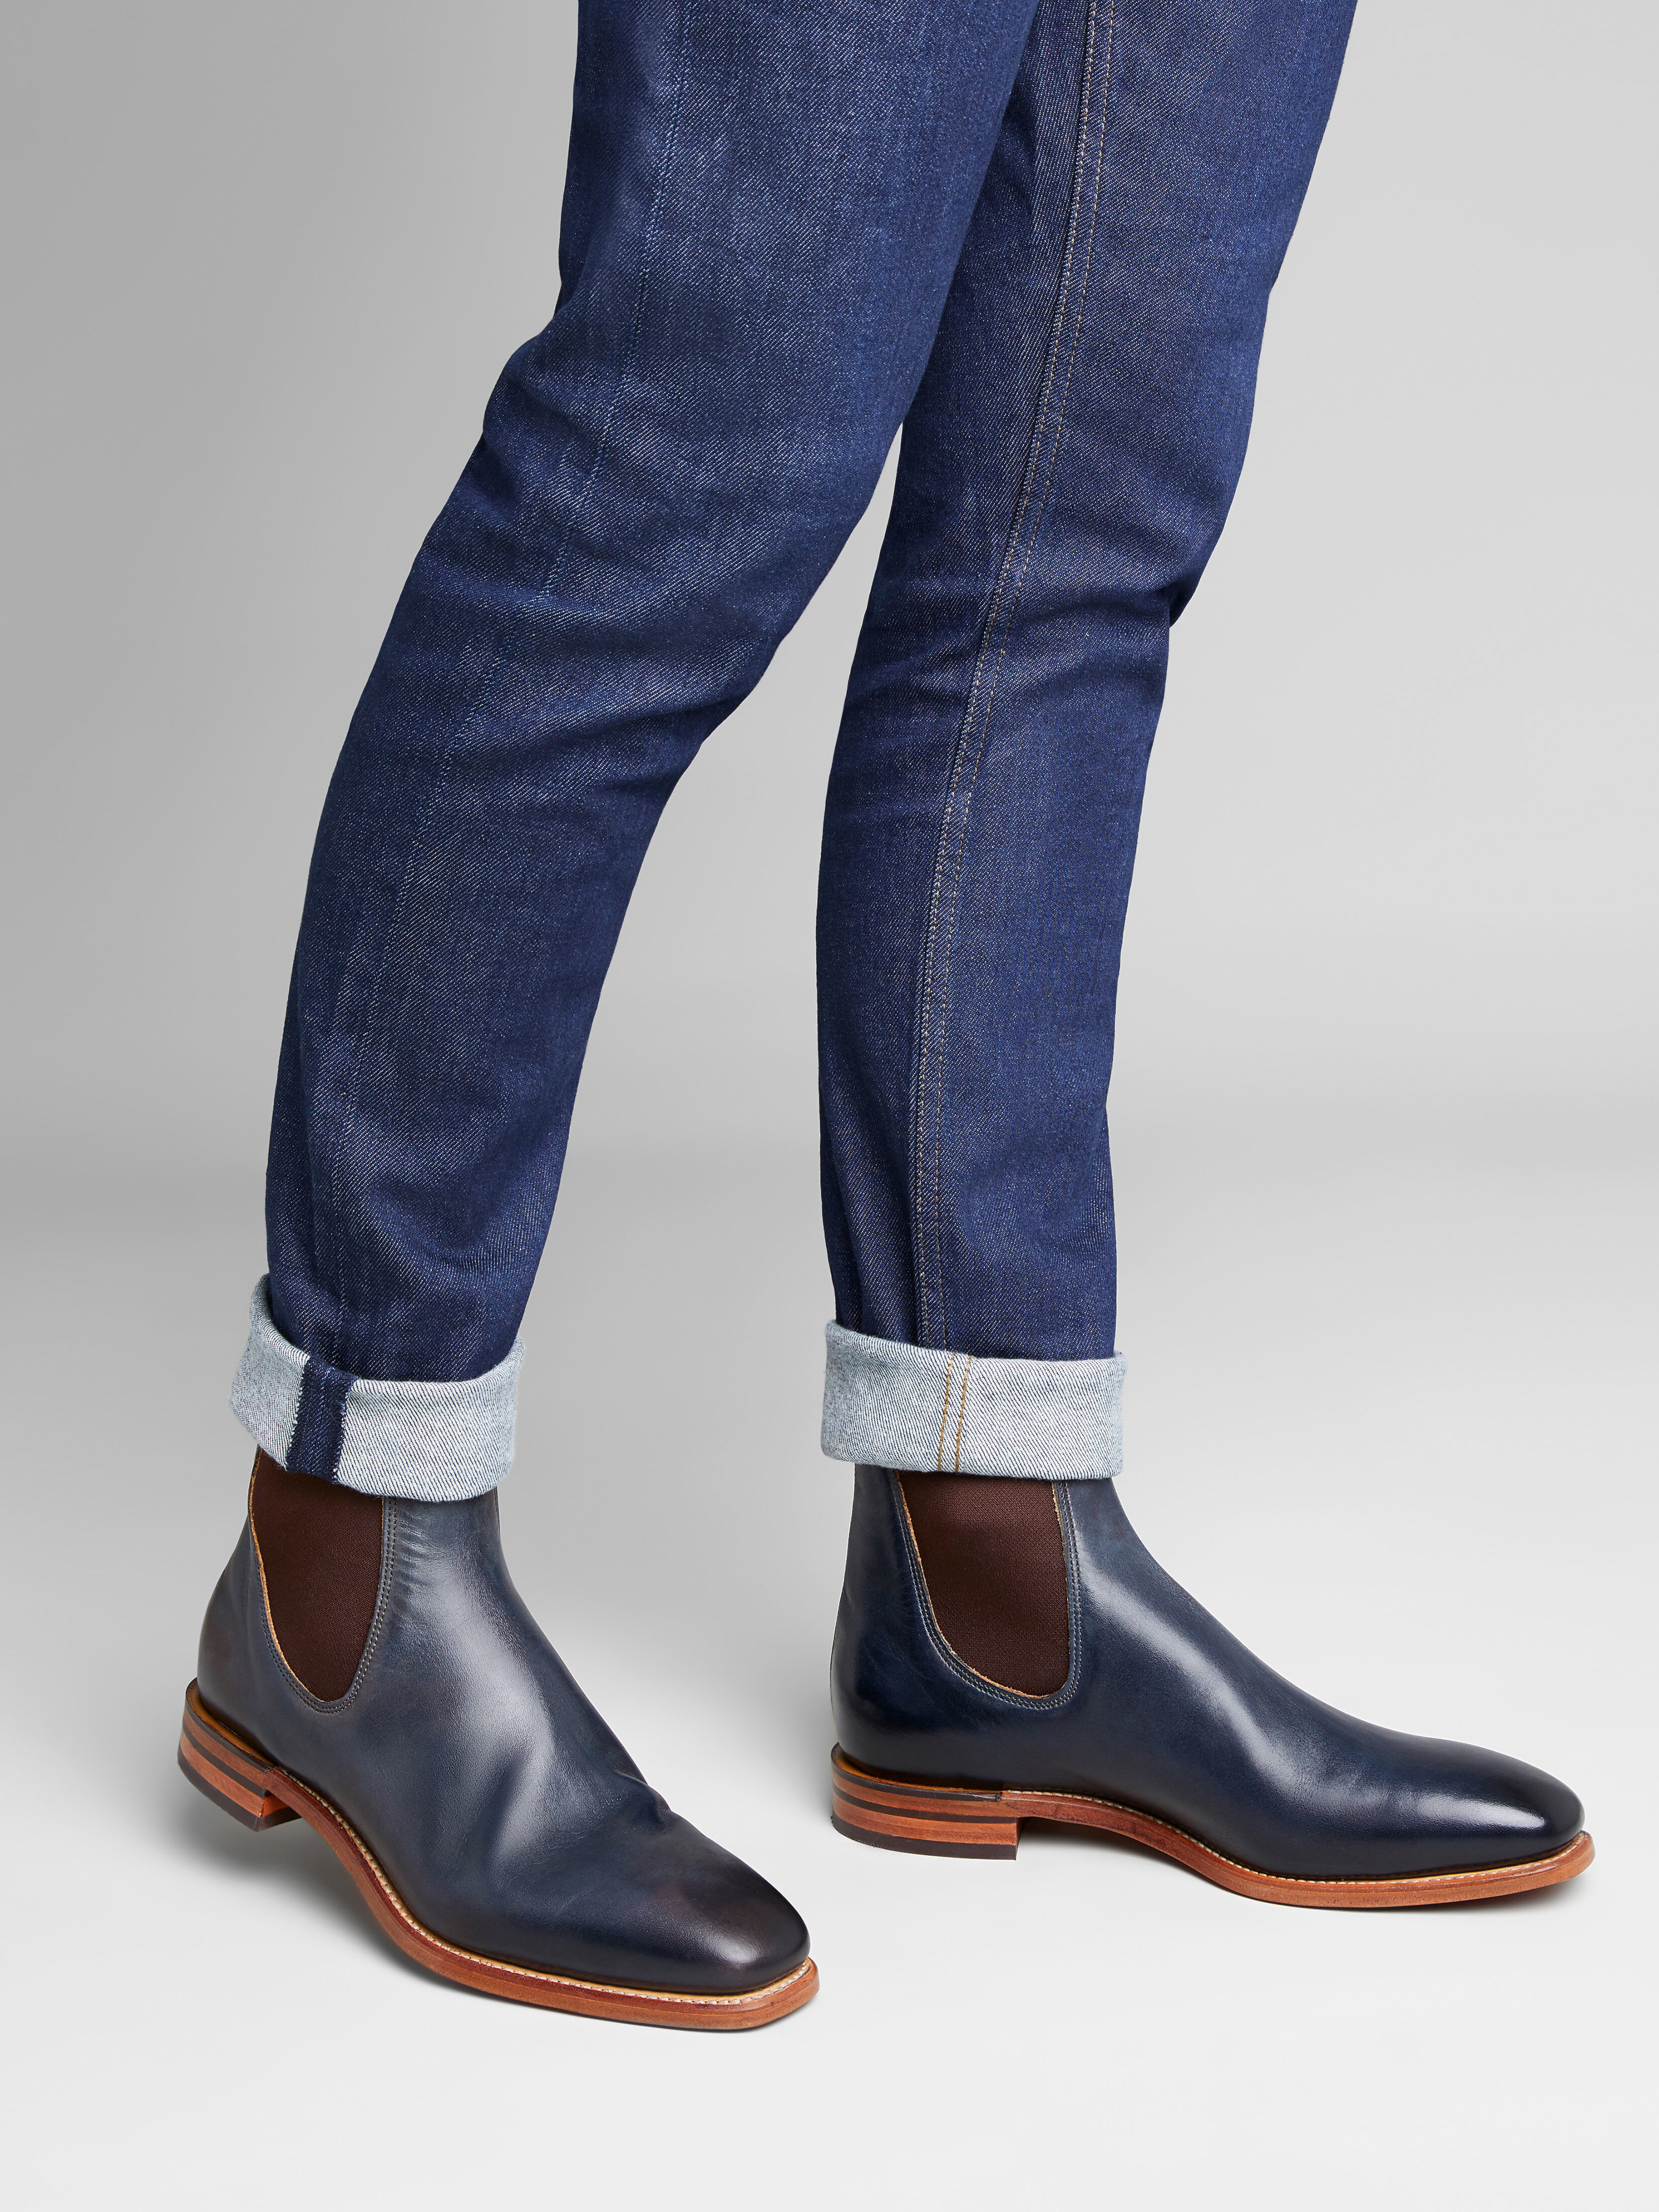 mens blue leather boots